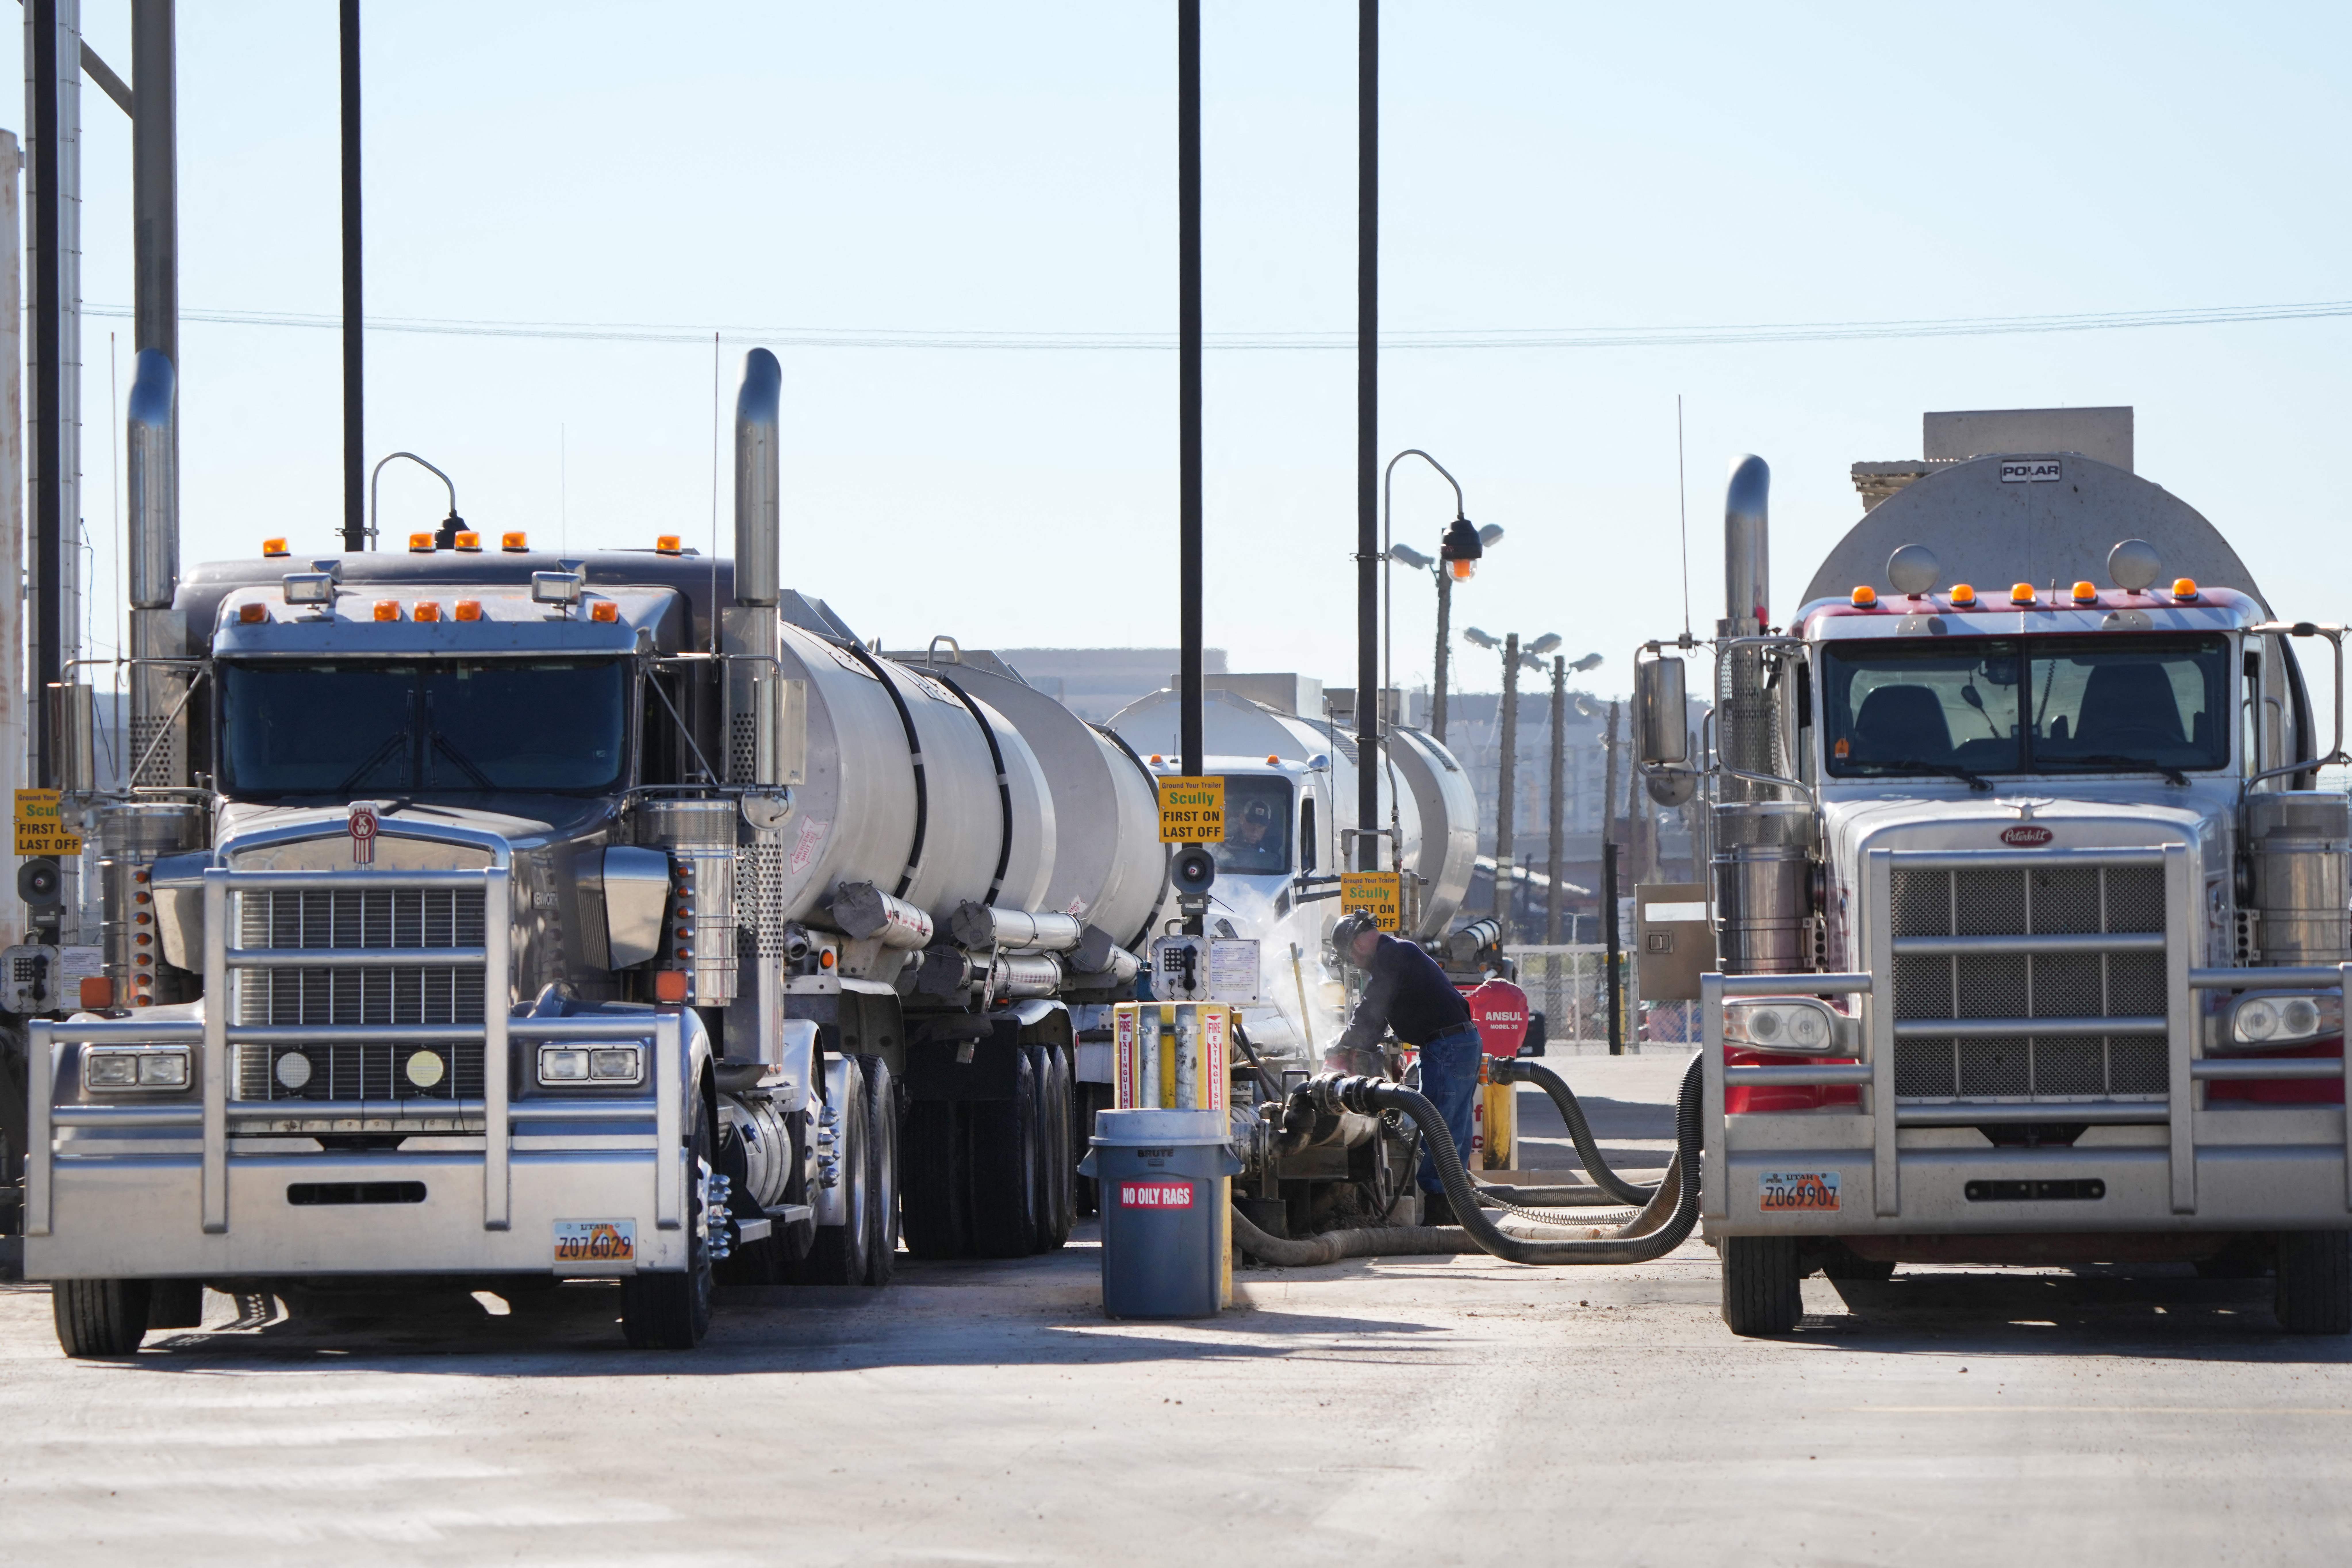 Oil tankers drop off crude oil to be refined into gas at the Marathon Oil Refinery in Salt Lake City, Utah, on Oct. 29, 2021. (George Frey/AFP via Getty Images)